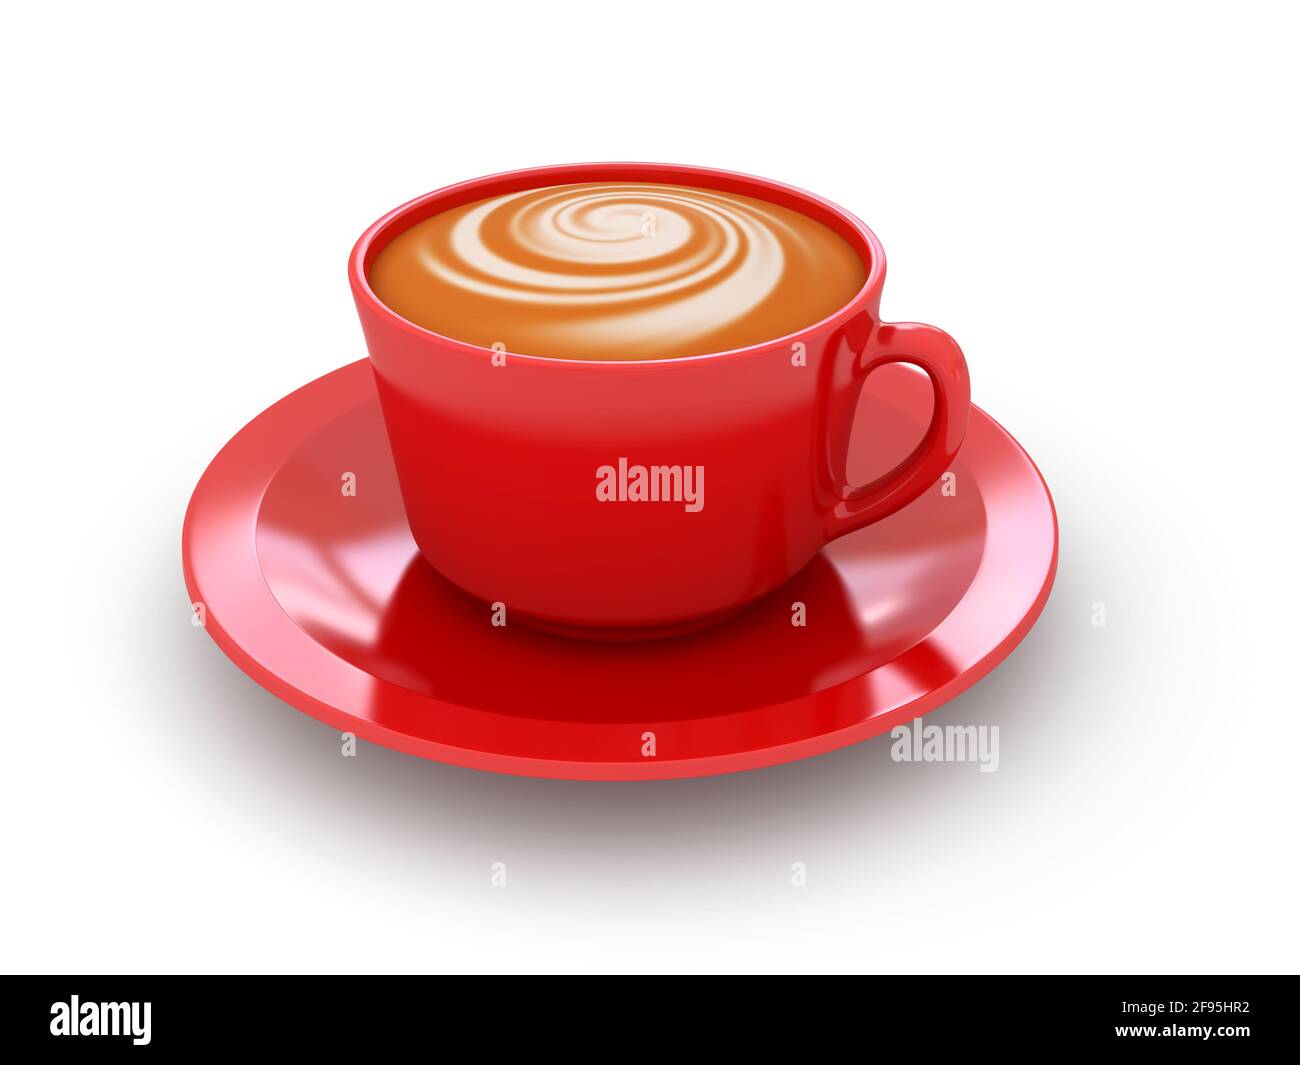 Red cup of coffee on a white background. 3d rendered image Stock Photo